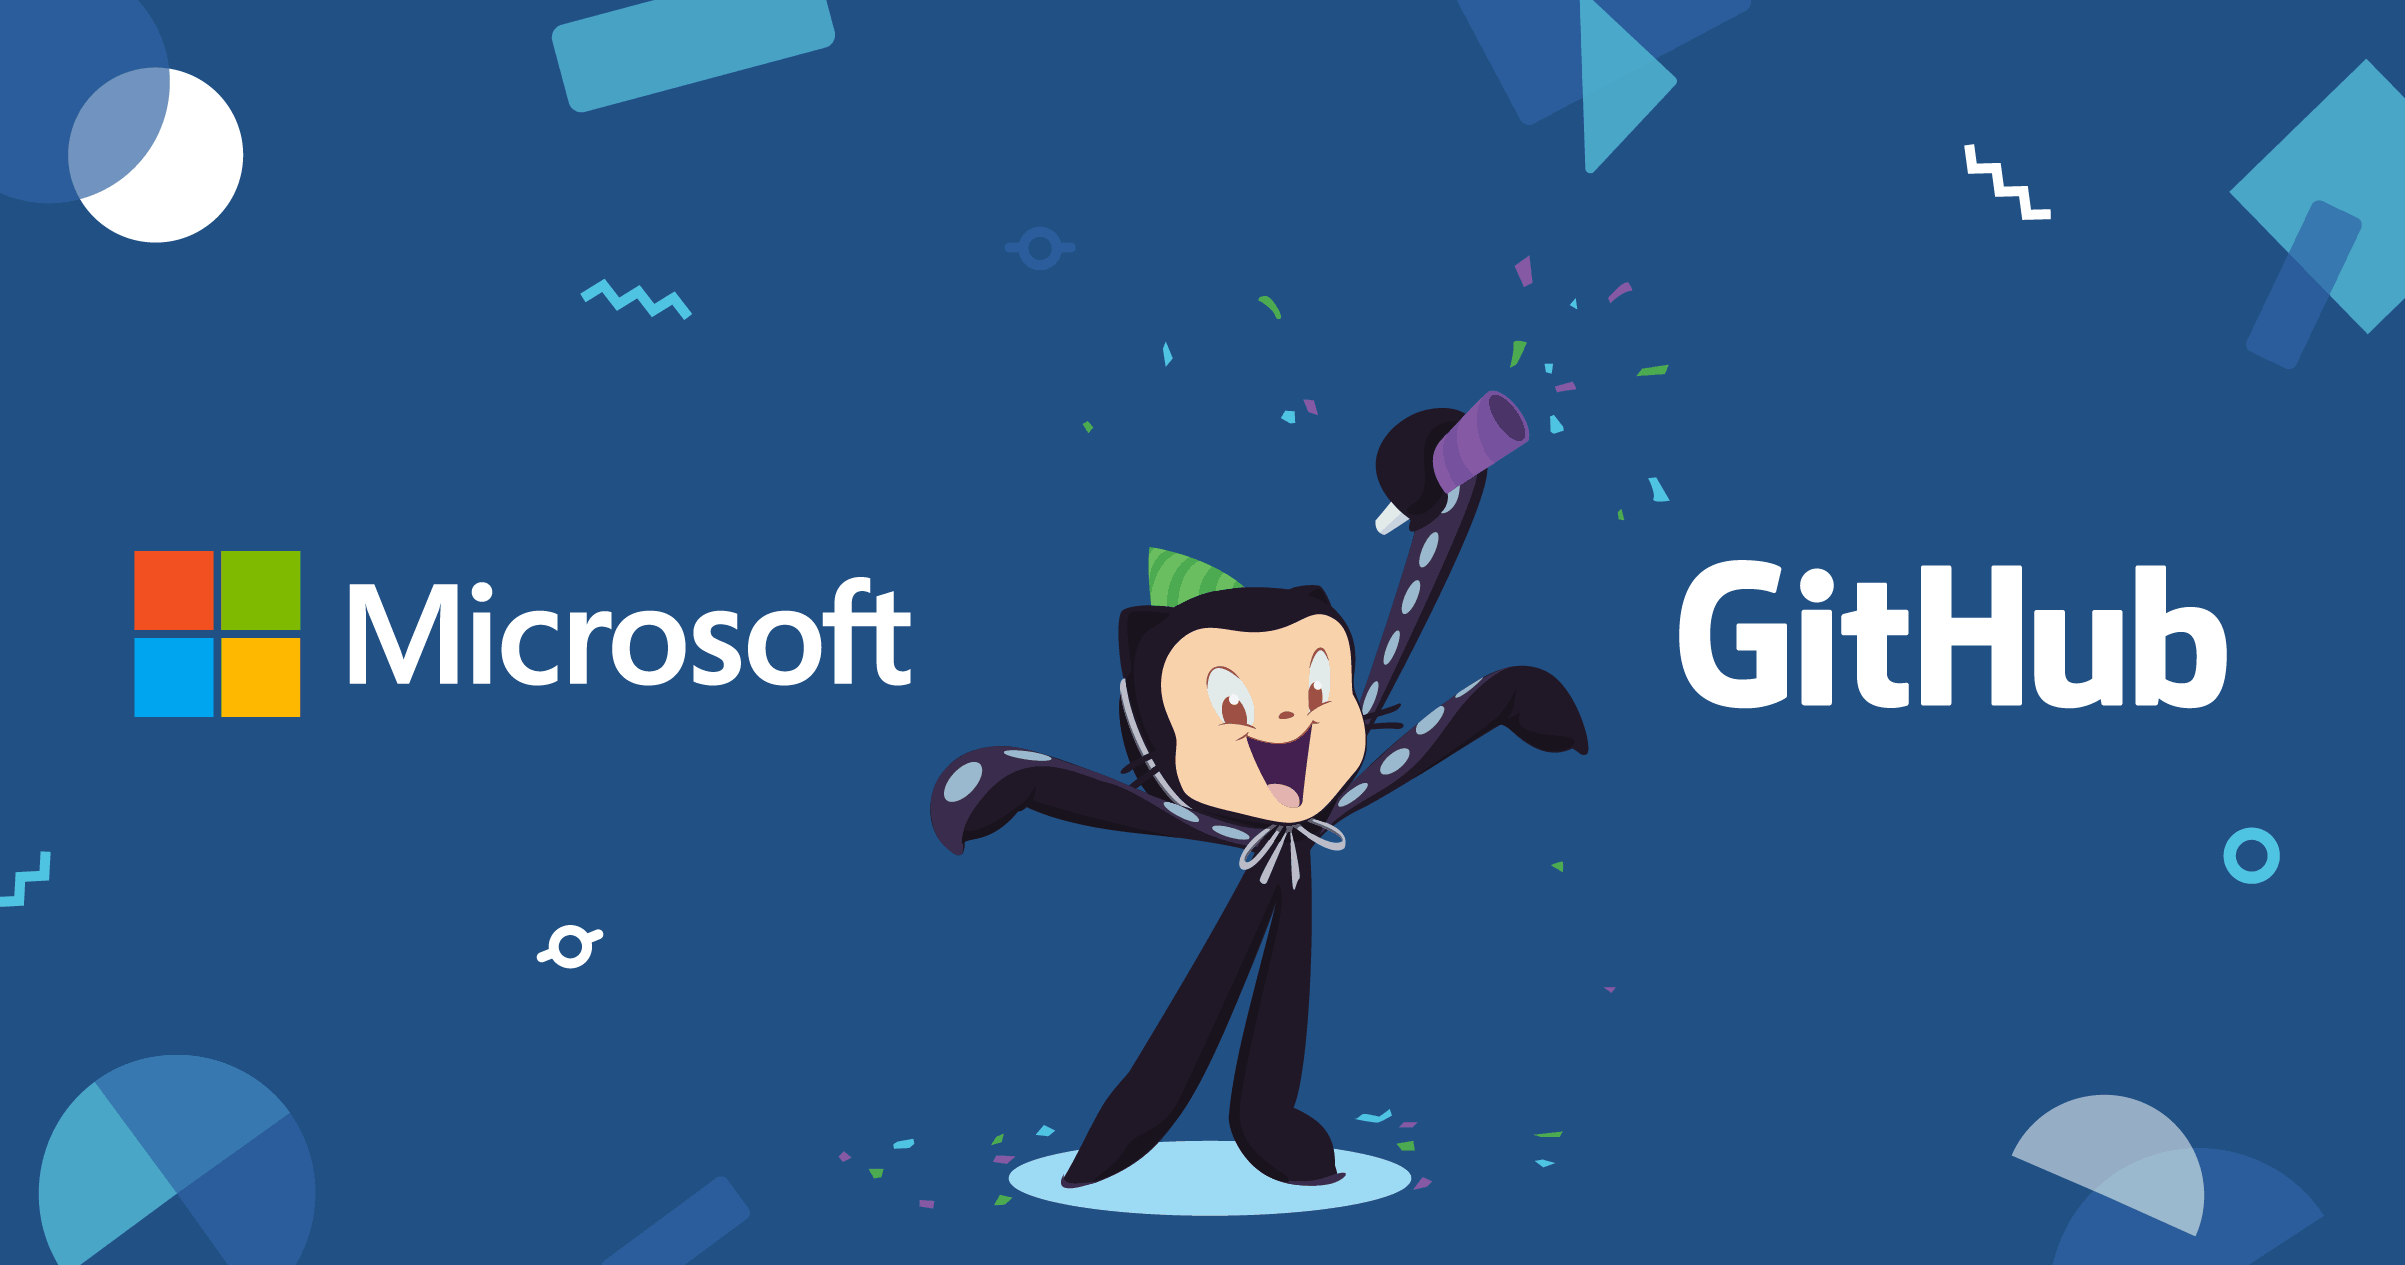 It's official, GitHub is now owned by Microsoft - OnMSFT.com - October 26, 2018